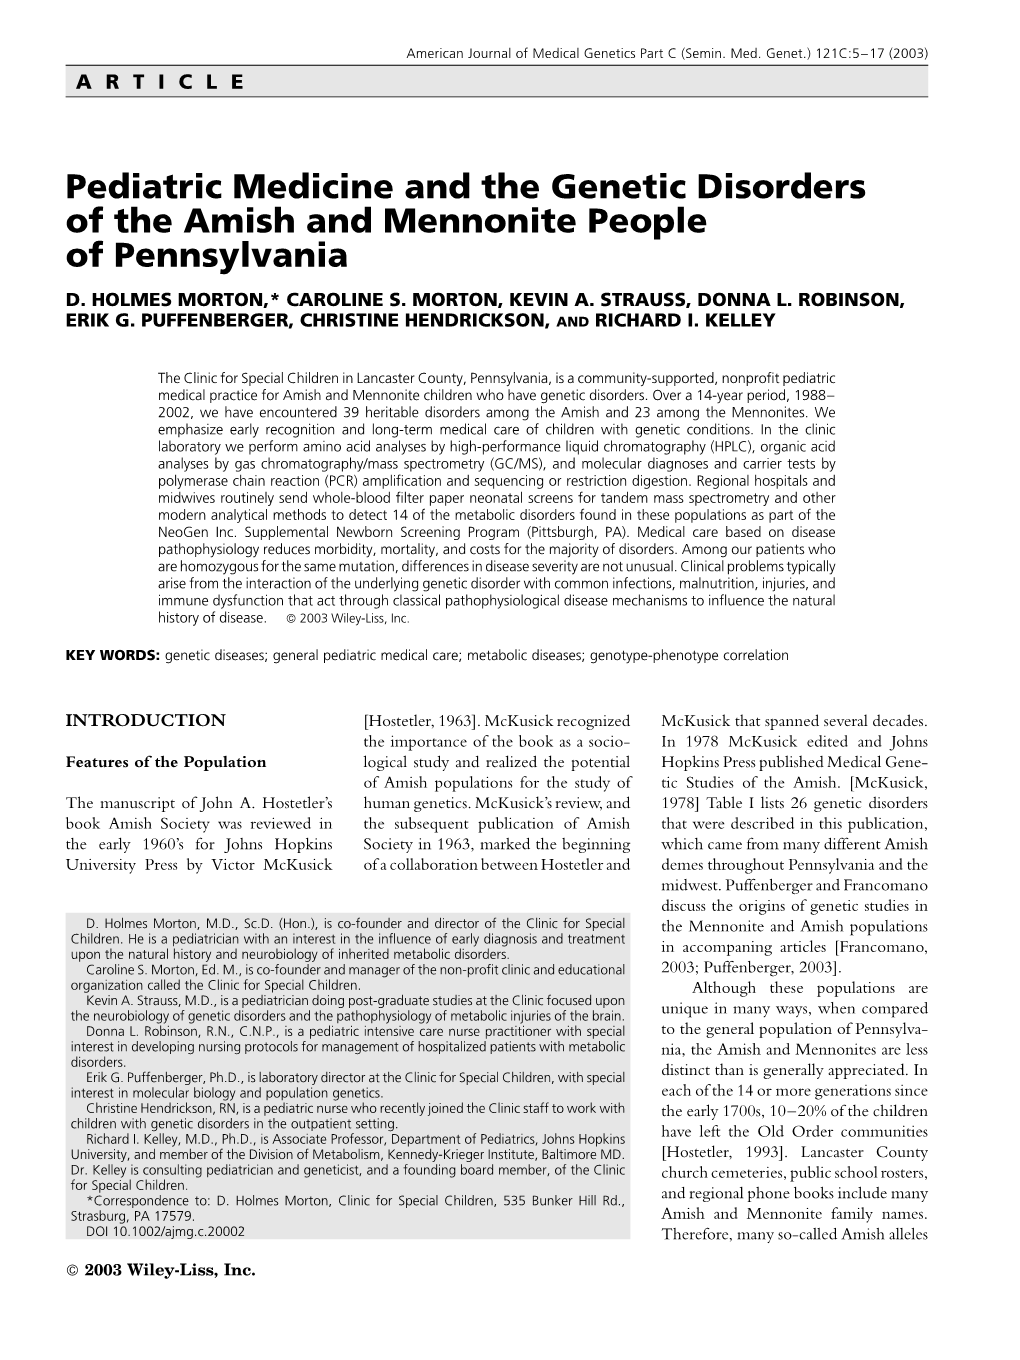 Pediatric Medicine and the Genetic Disorders of the Amish and Mennonite People of Pennsylvania D